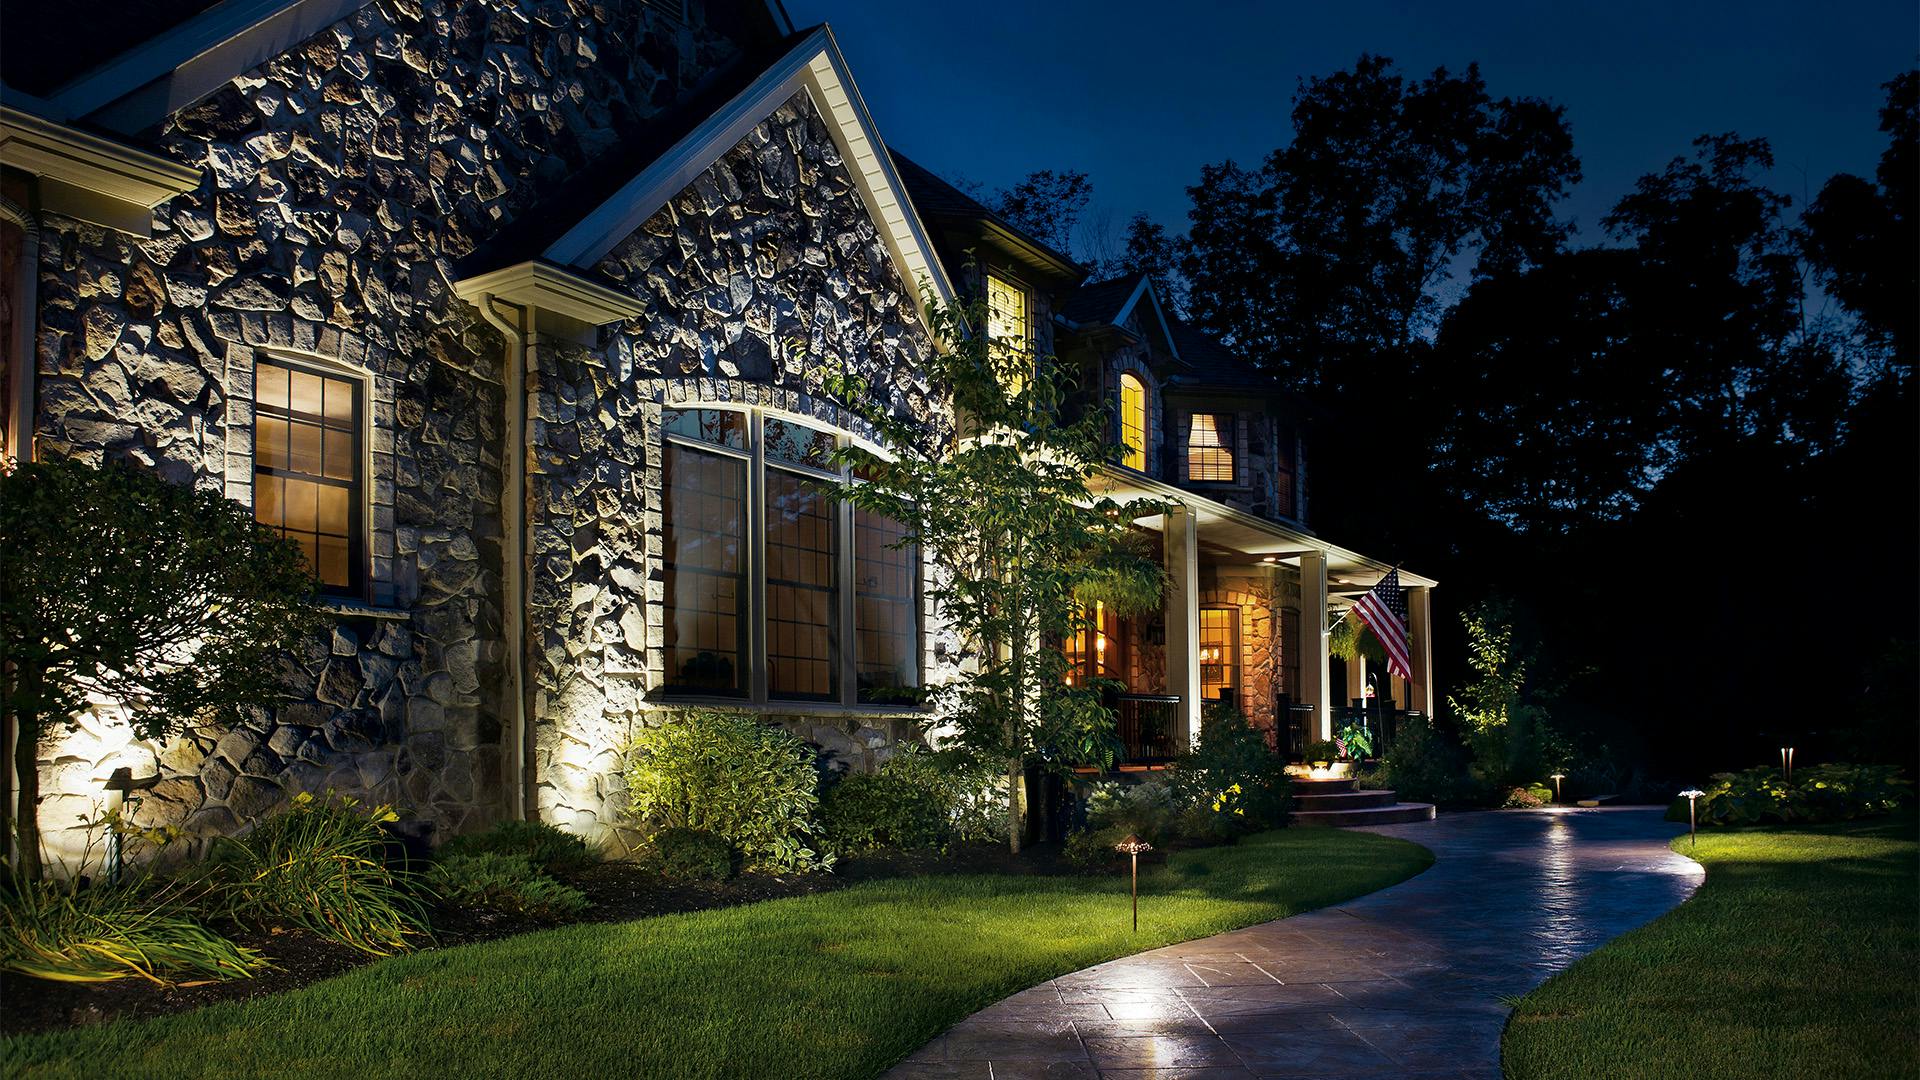 Exterior of a stone home at night with variety of path lights and uplighting